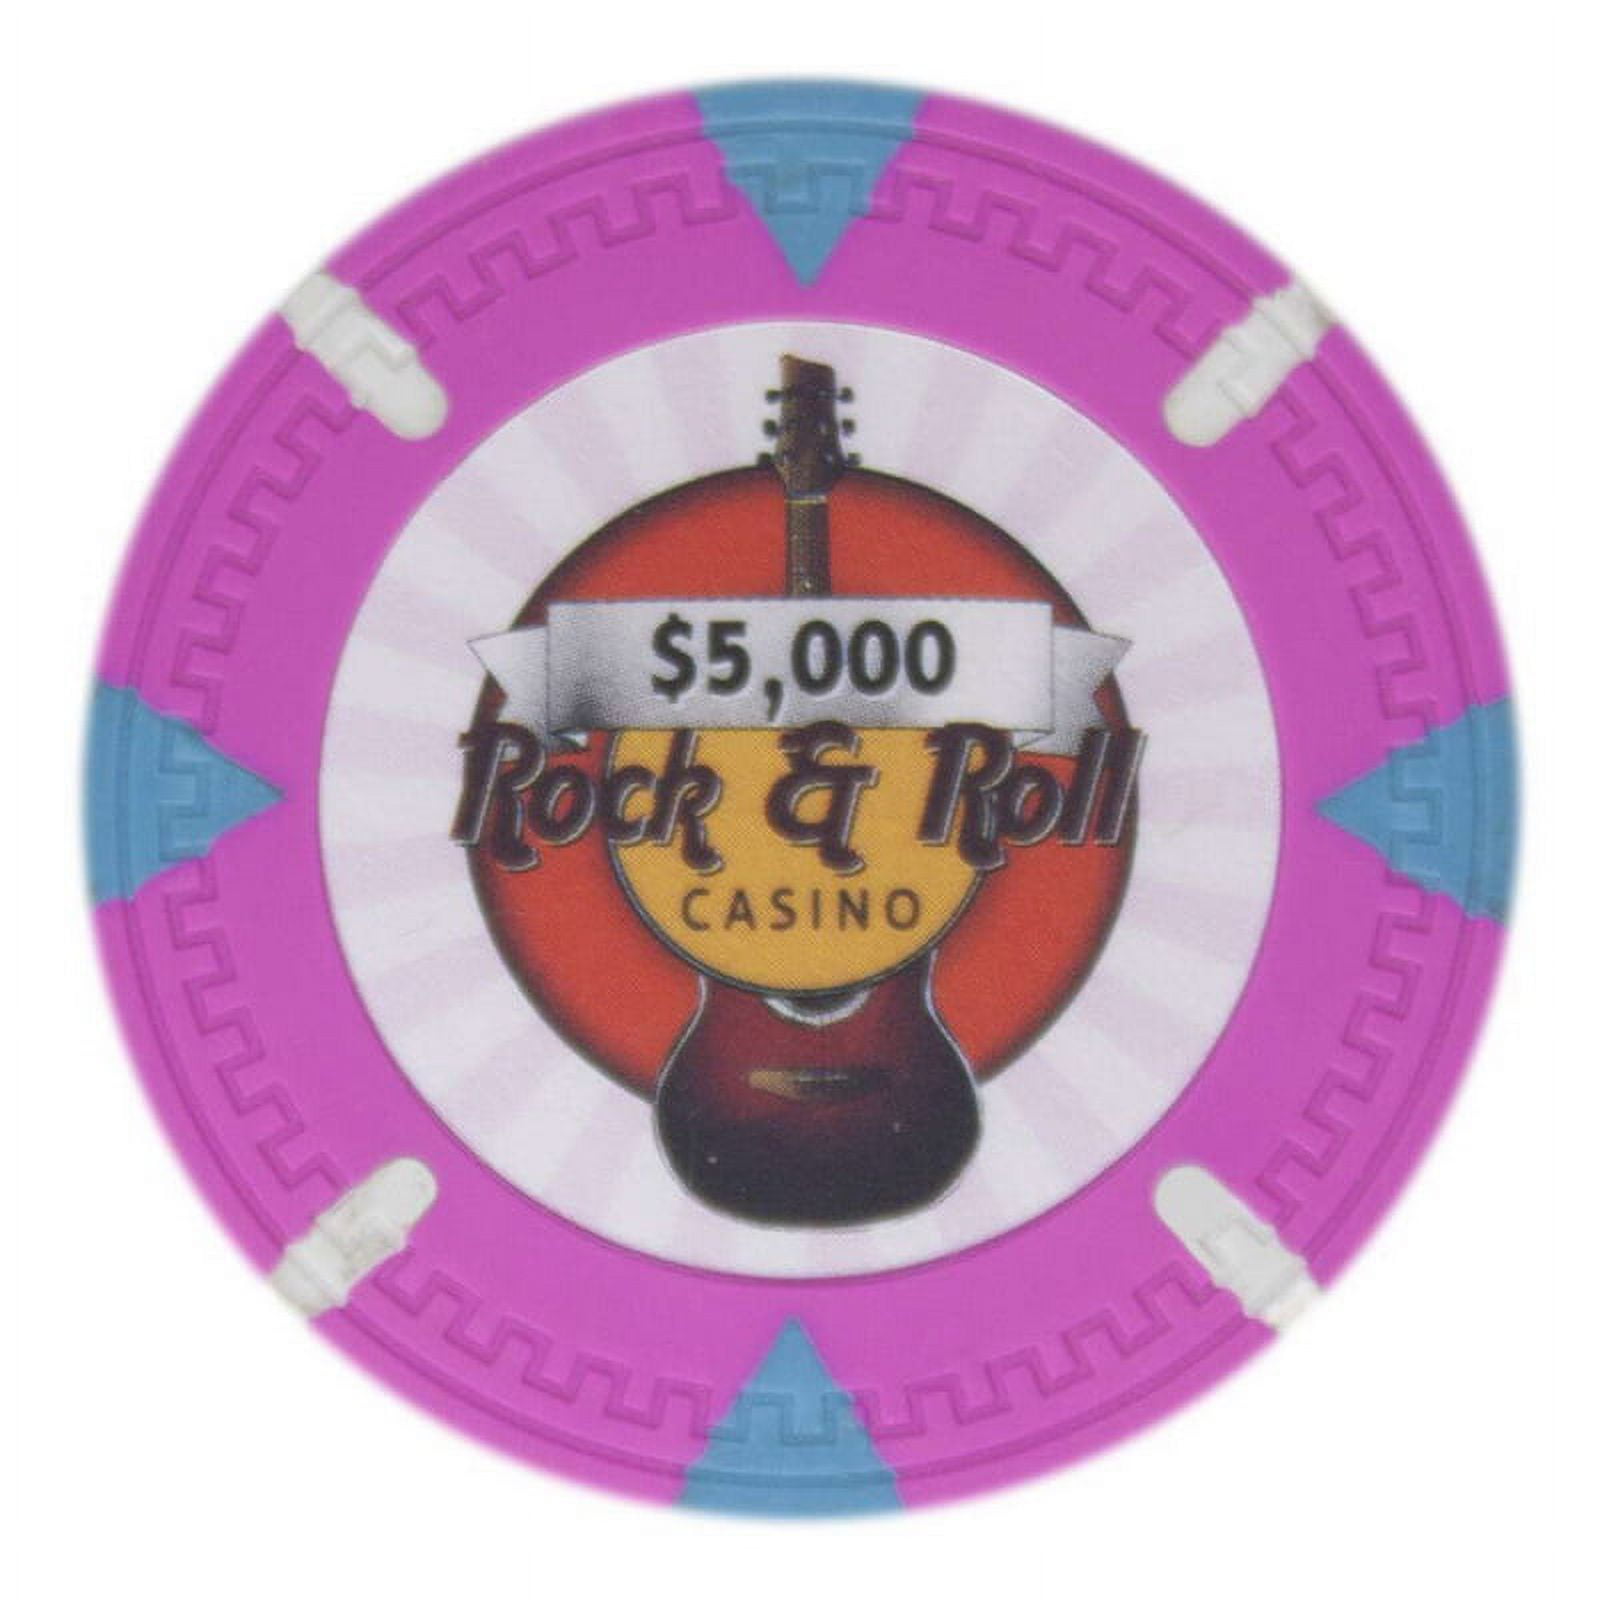 Cprr-5000-25 13.5 G Rock & Roll - Dollar 5000, Pack Of 25